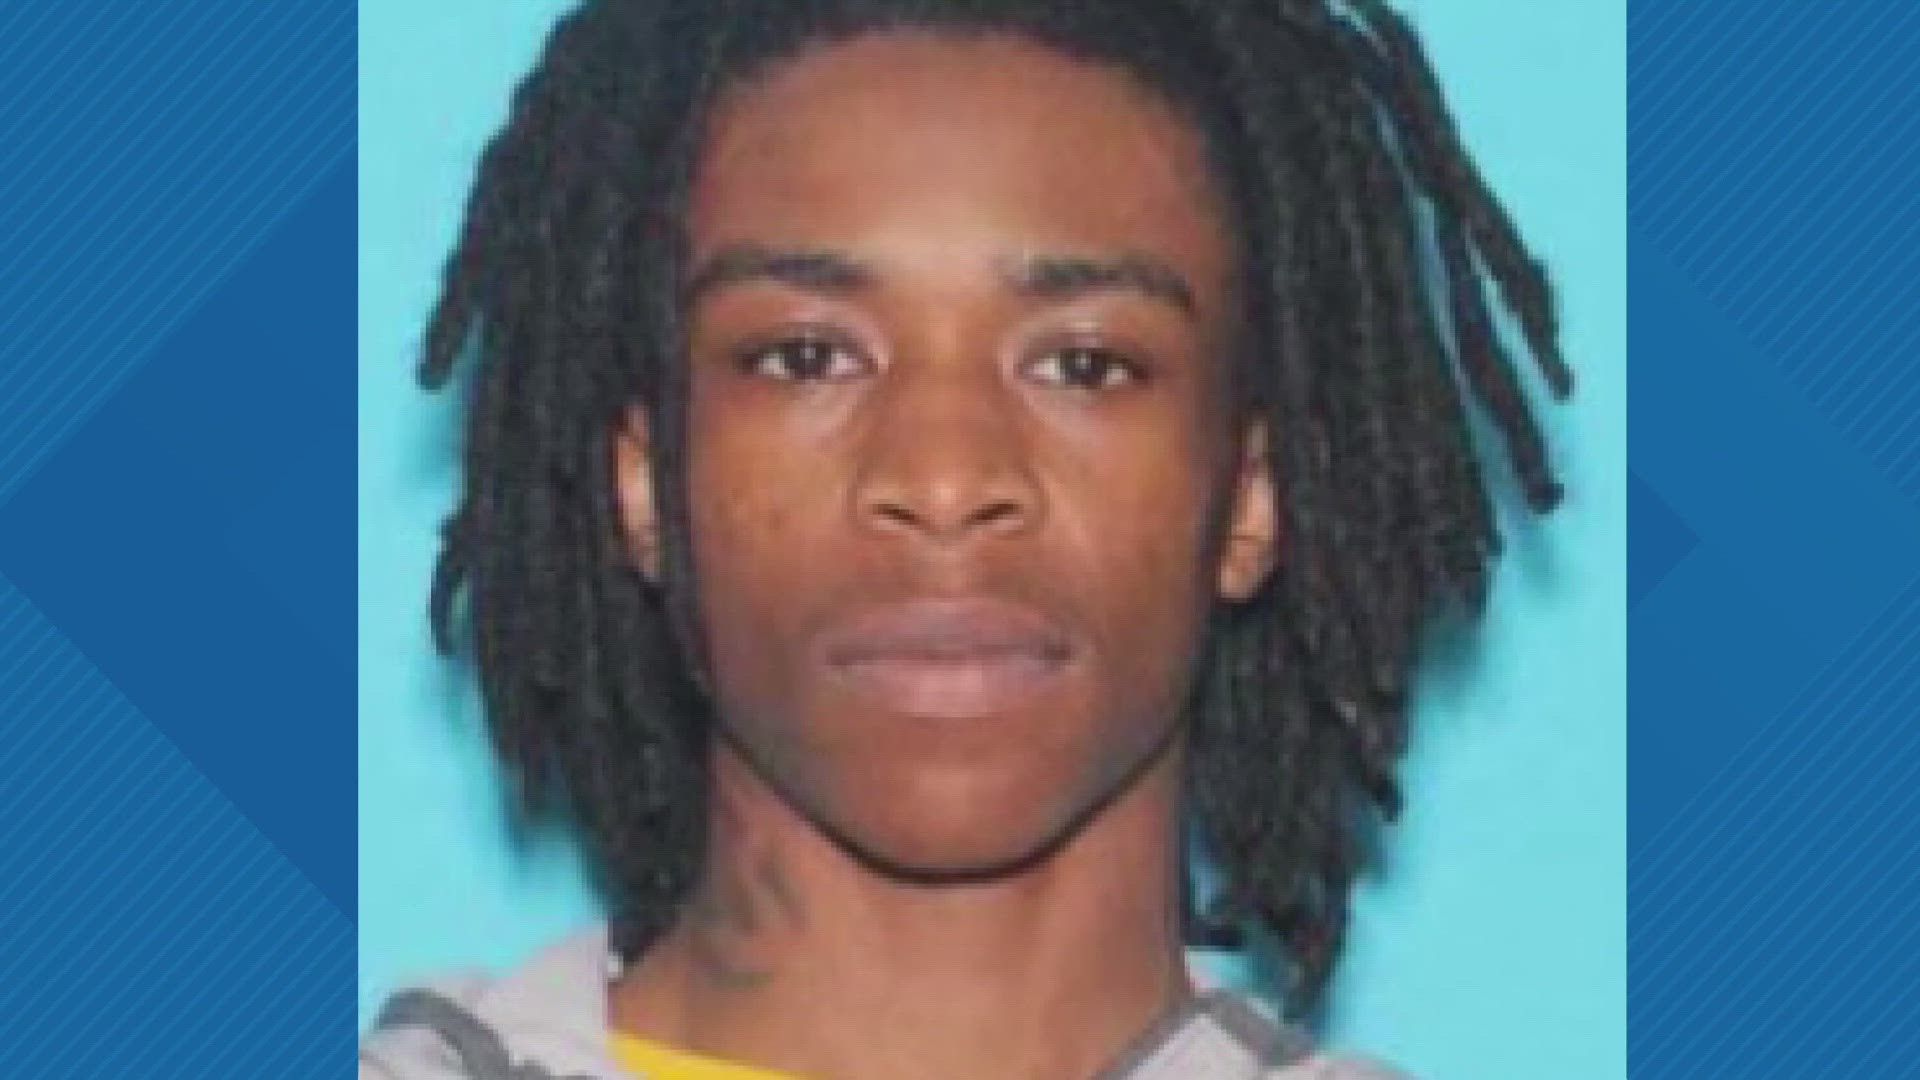 A second 18-year-old was charged Tuesday in connection with the deadly shooting. Police said he has not been arrested.